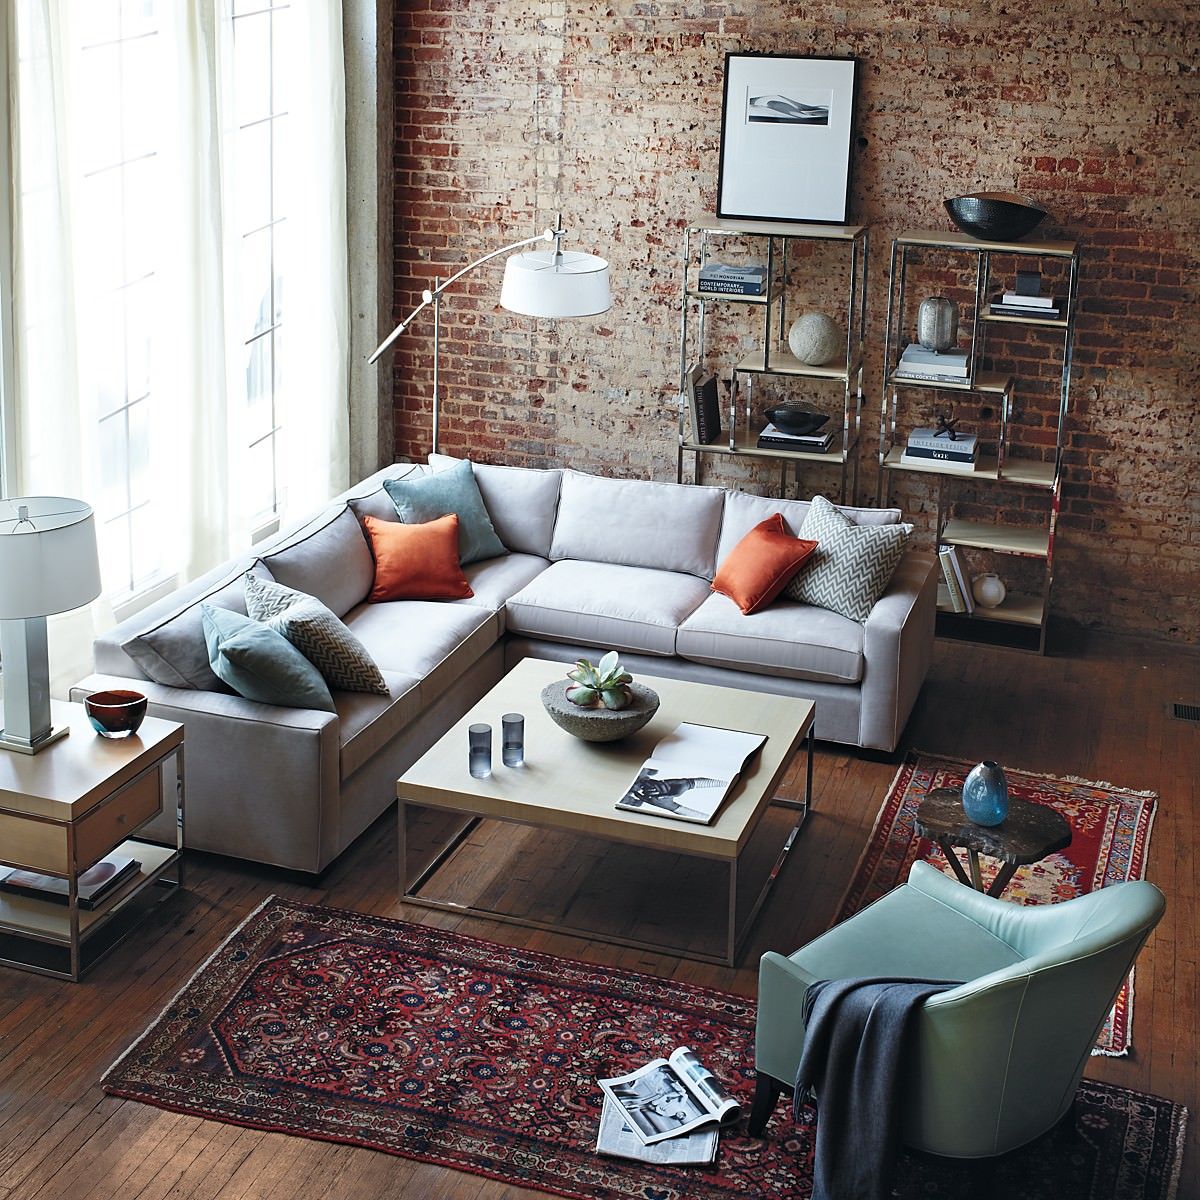 Exposed red bricks in the relieved living room